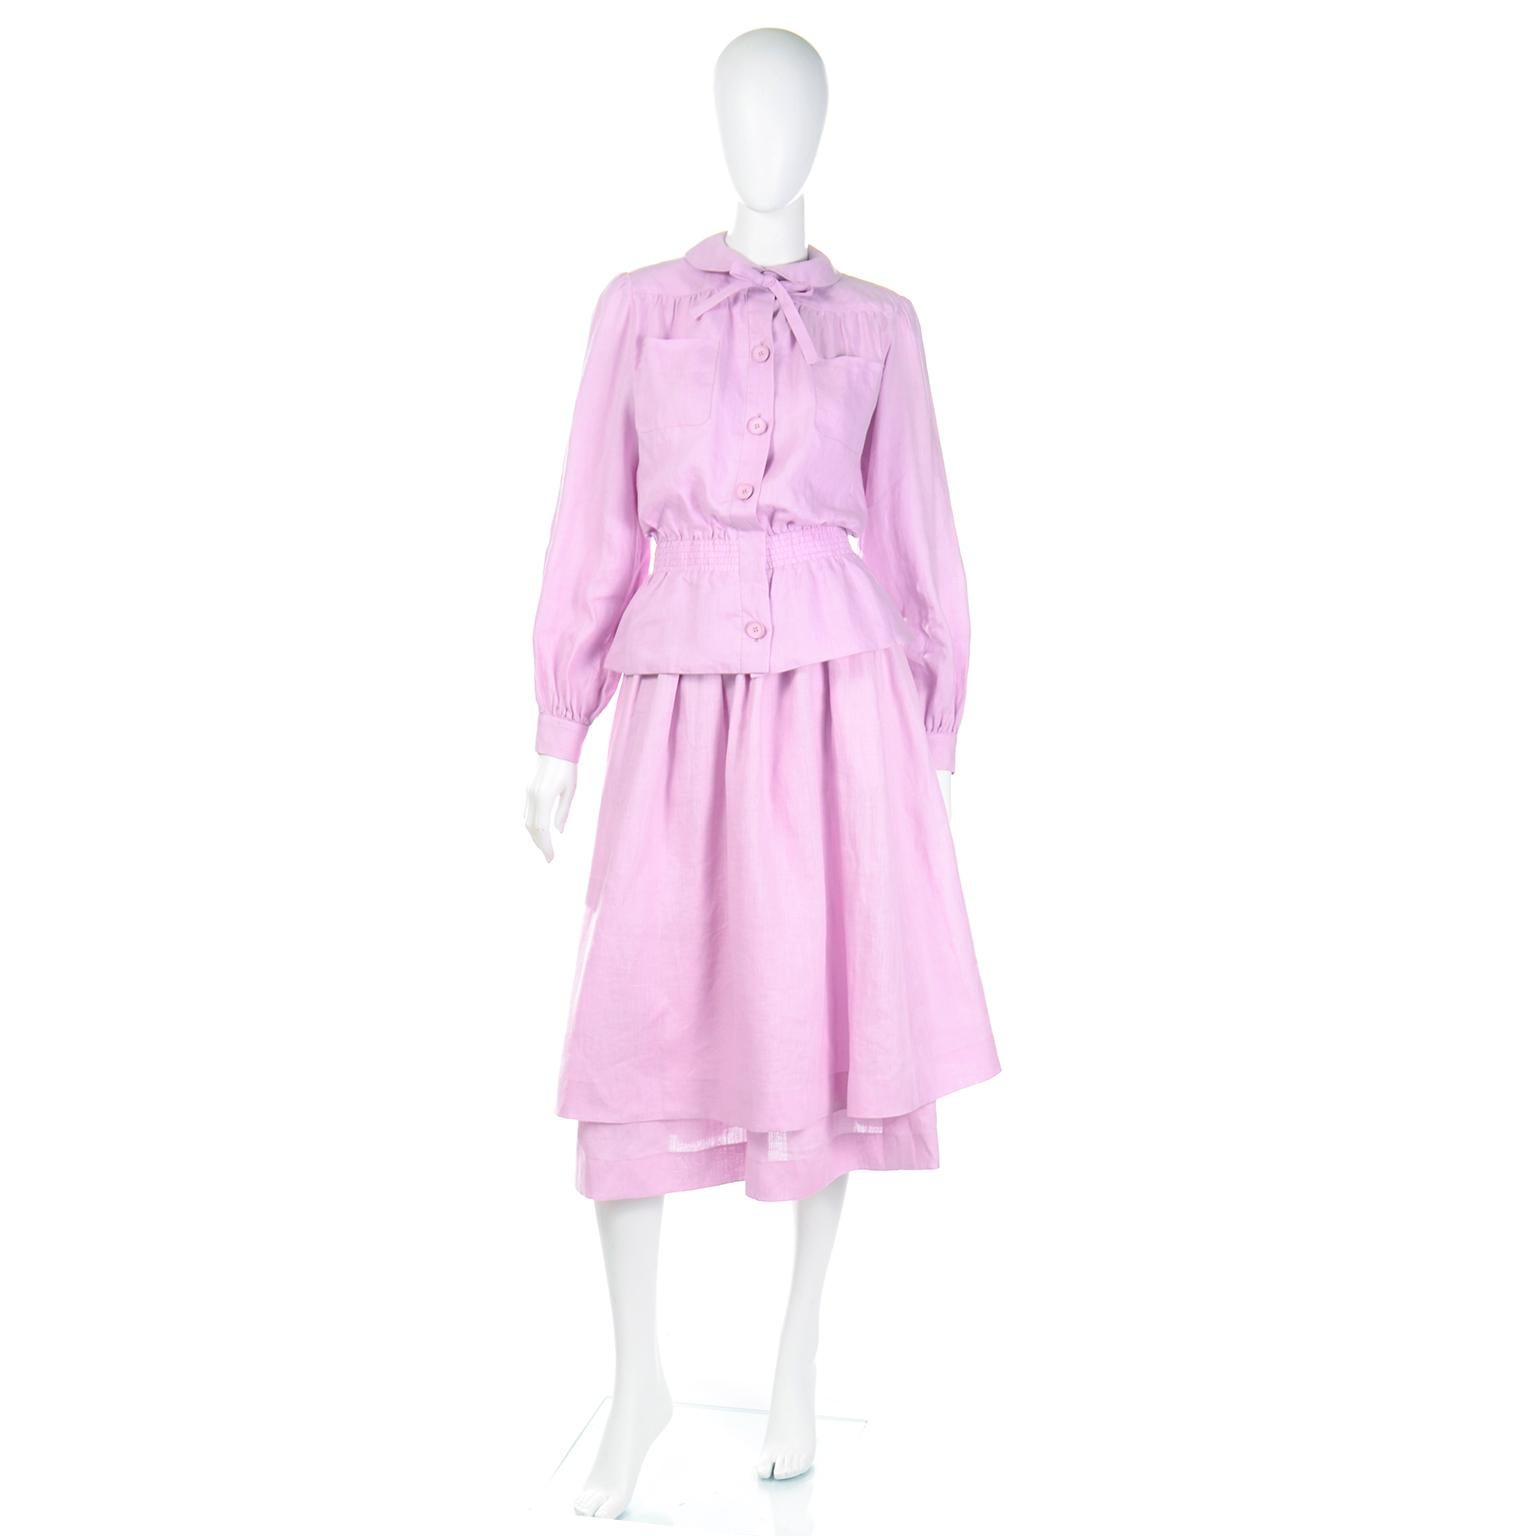 This incredible vintage Valentino Boutique pale purple linen 2 piece dress comes from the estate of a Valentino and Yves Saint Laurent client who bought all of her clothing during the 1960's, 1970's, and early 1980's. Her wardrobe was in pristine